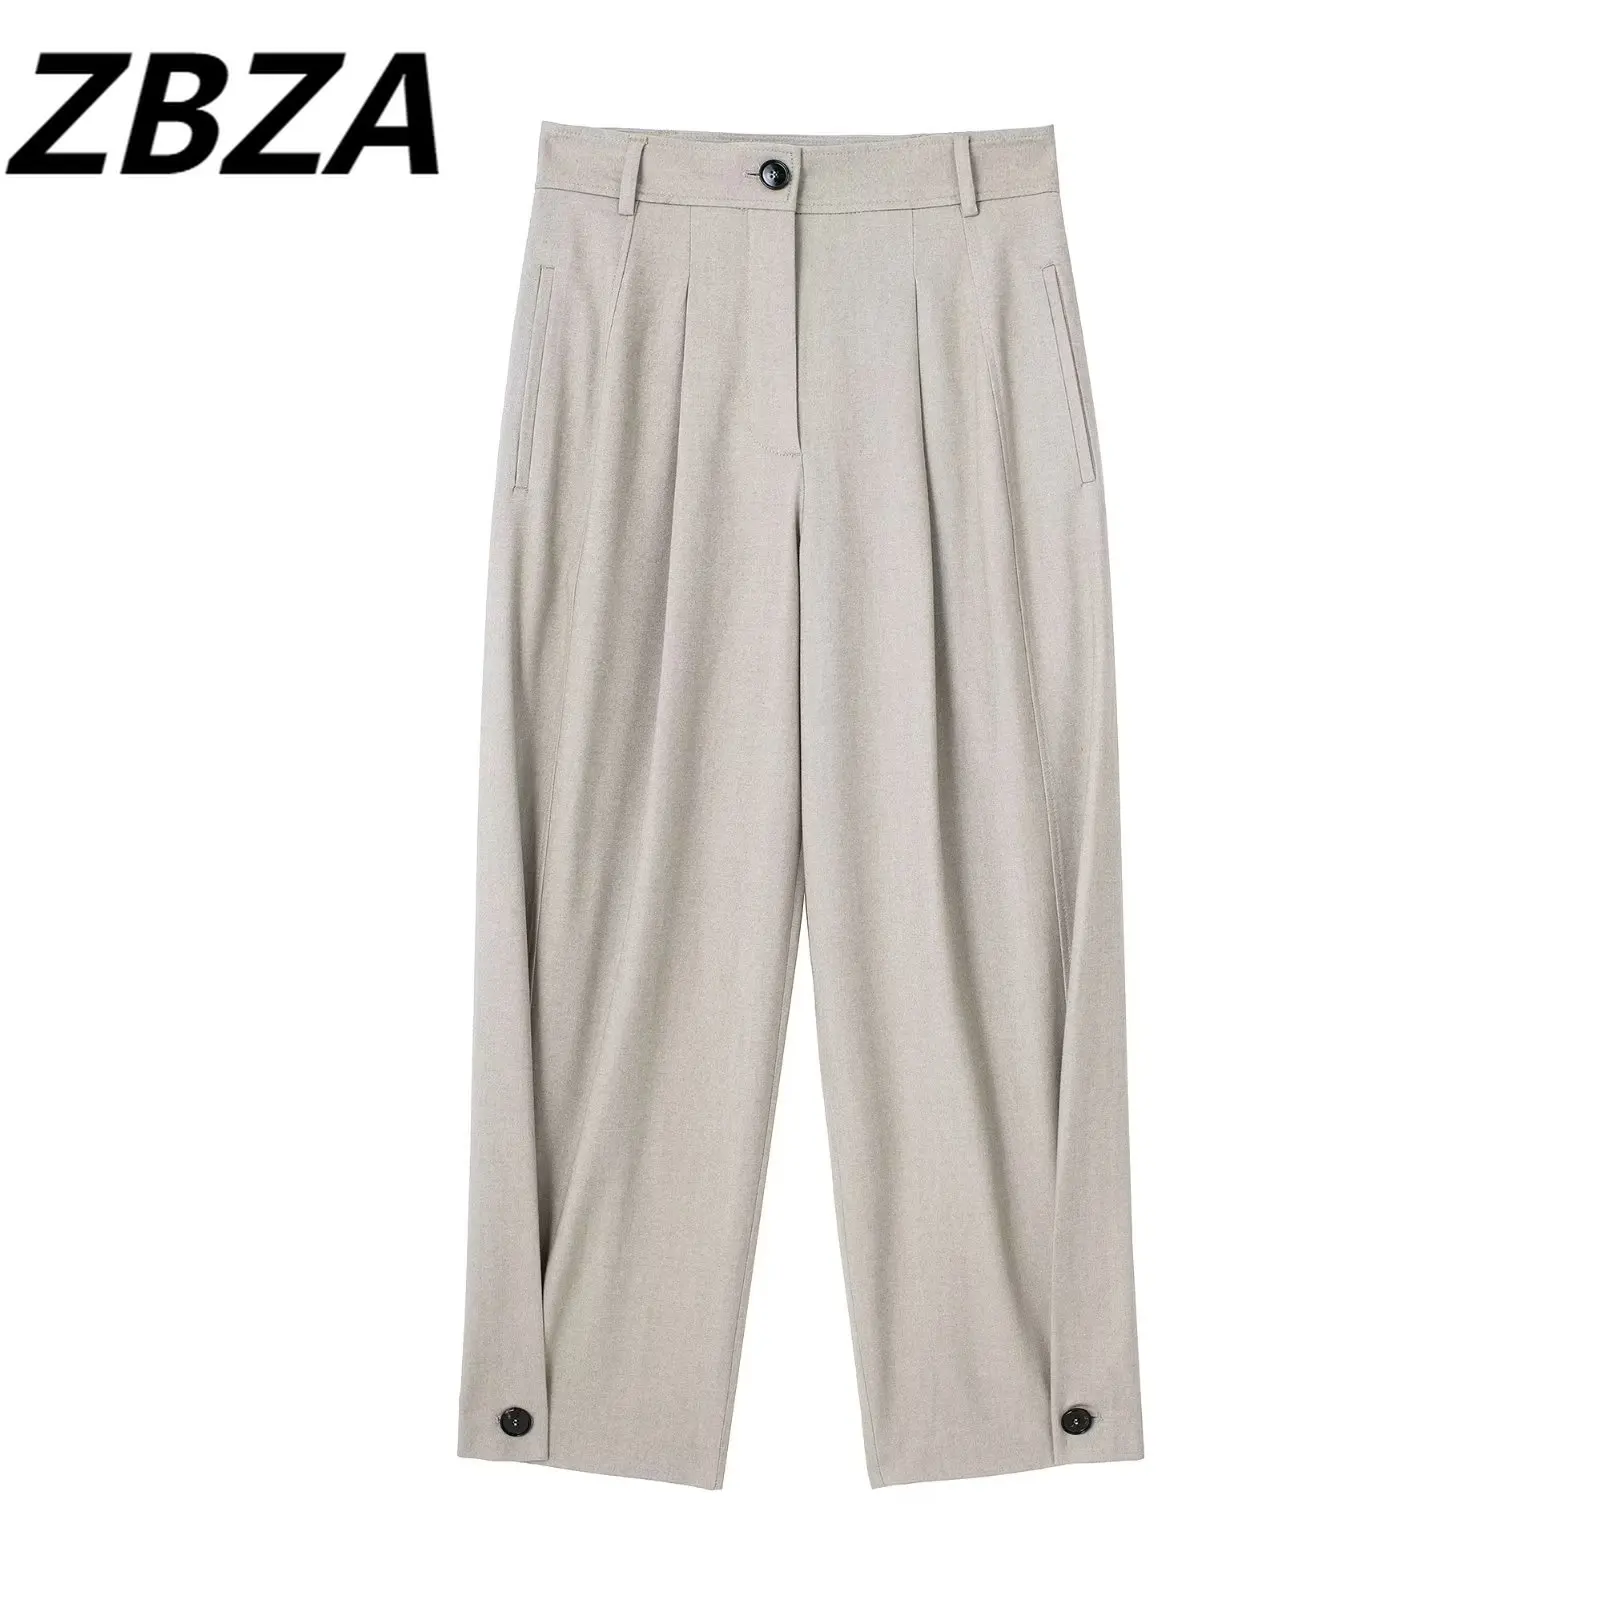 

ZBZA Women 2023 spring New Fashion fold design Retract your legs Pants Vintage High Waist Zipper Fly Female Trousers Mujer